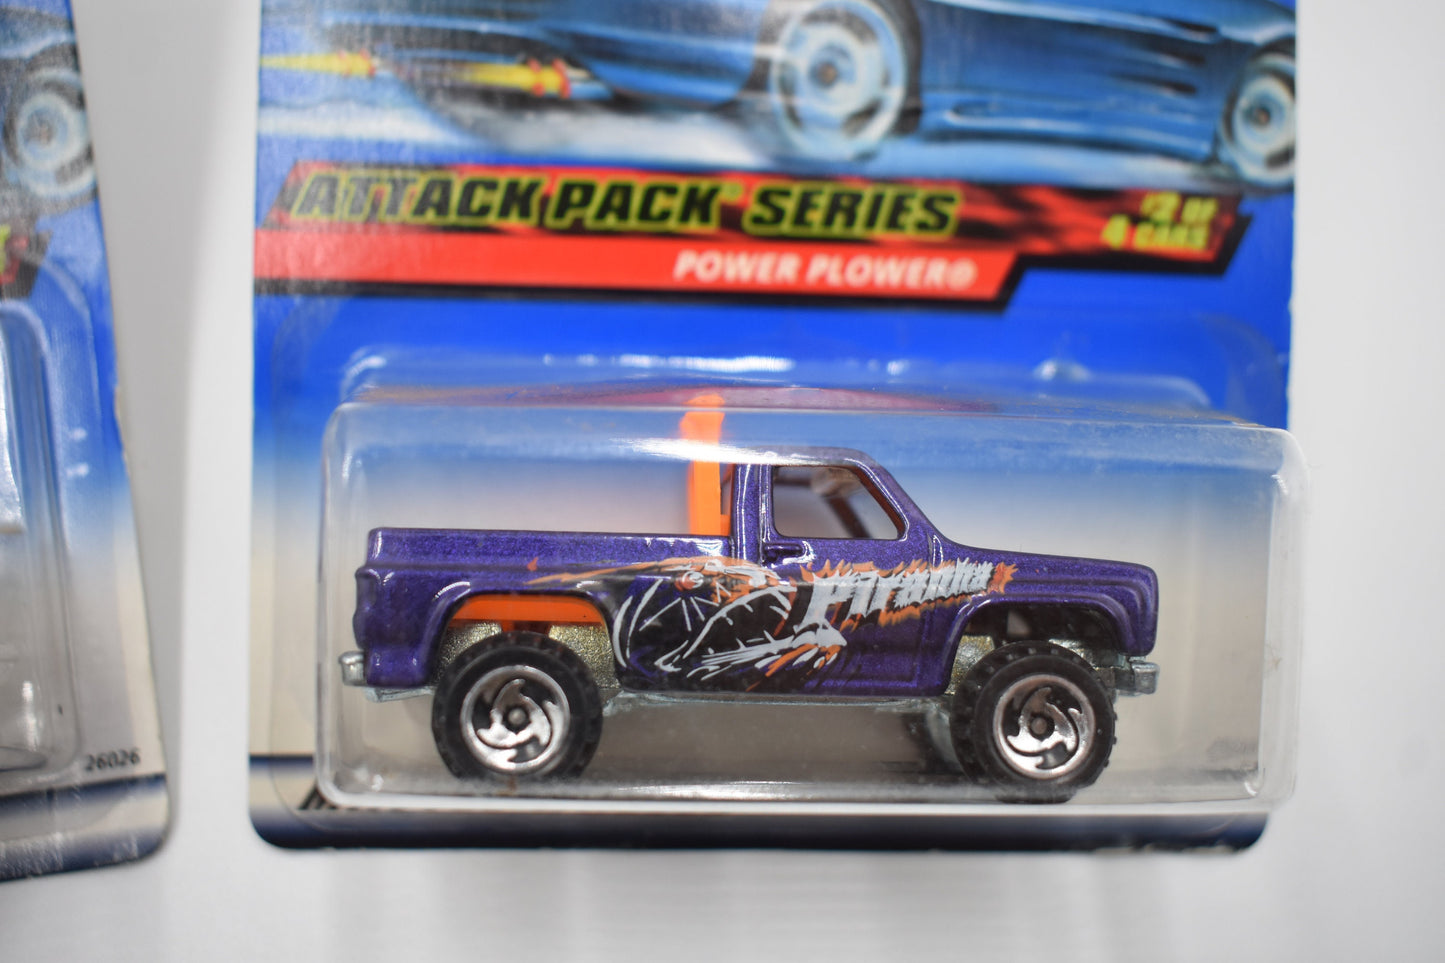 Hot Wheels '79 Ford F-150 Attack Pack Vintage Collectable Scale Model Miniature Toy Car Perfect Birthday Gift